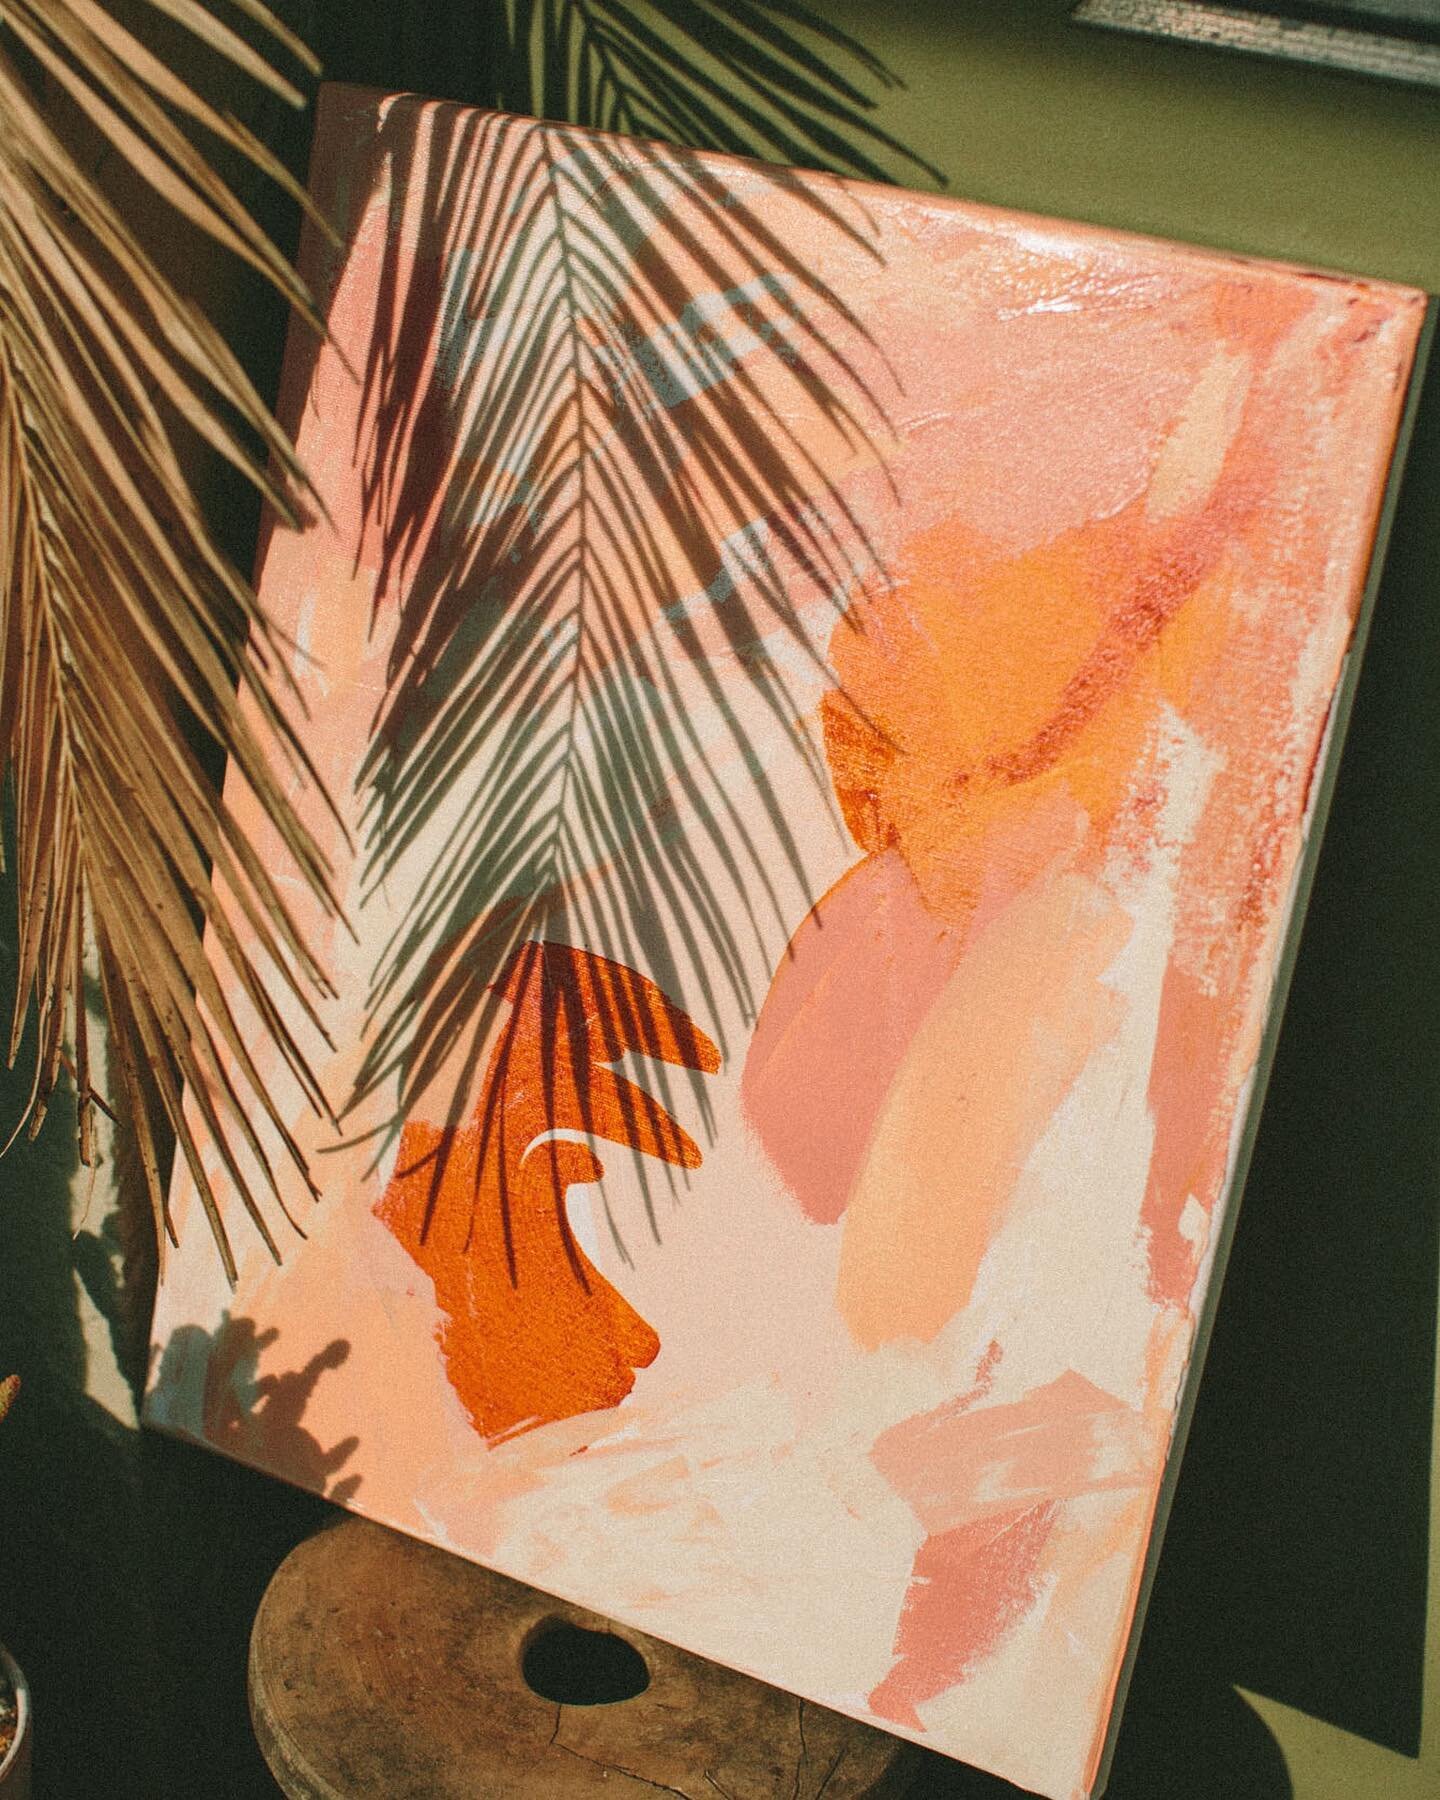 All work must now come with dried palm frond... how can I make that a thing ??? 😋
⠀⠀⠀⠀⠀⠀⠀⠀⠀
Part of me wants to actually paint the shadow on there ... other part of me just thinks everyone should invest in palm trees ☺️🧡🌴🌈